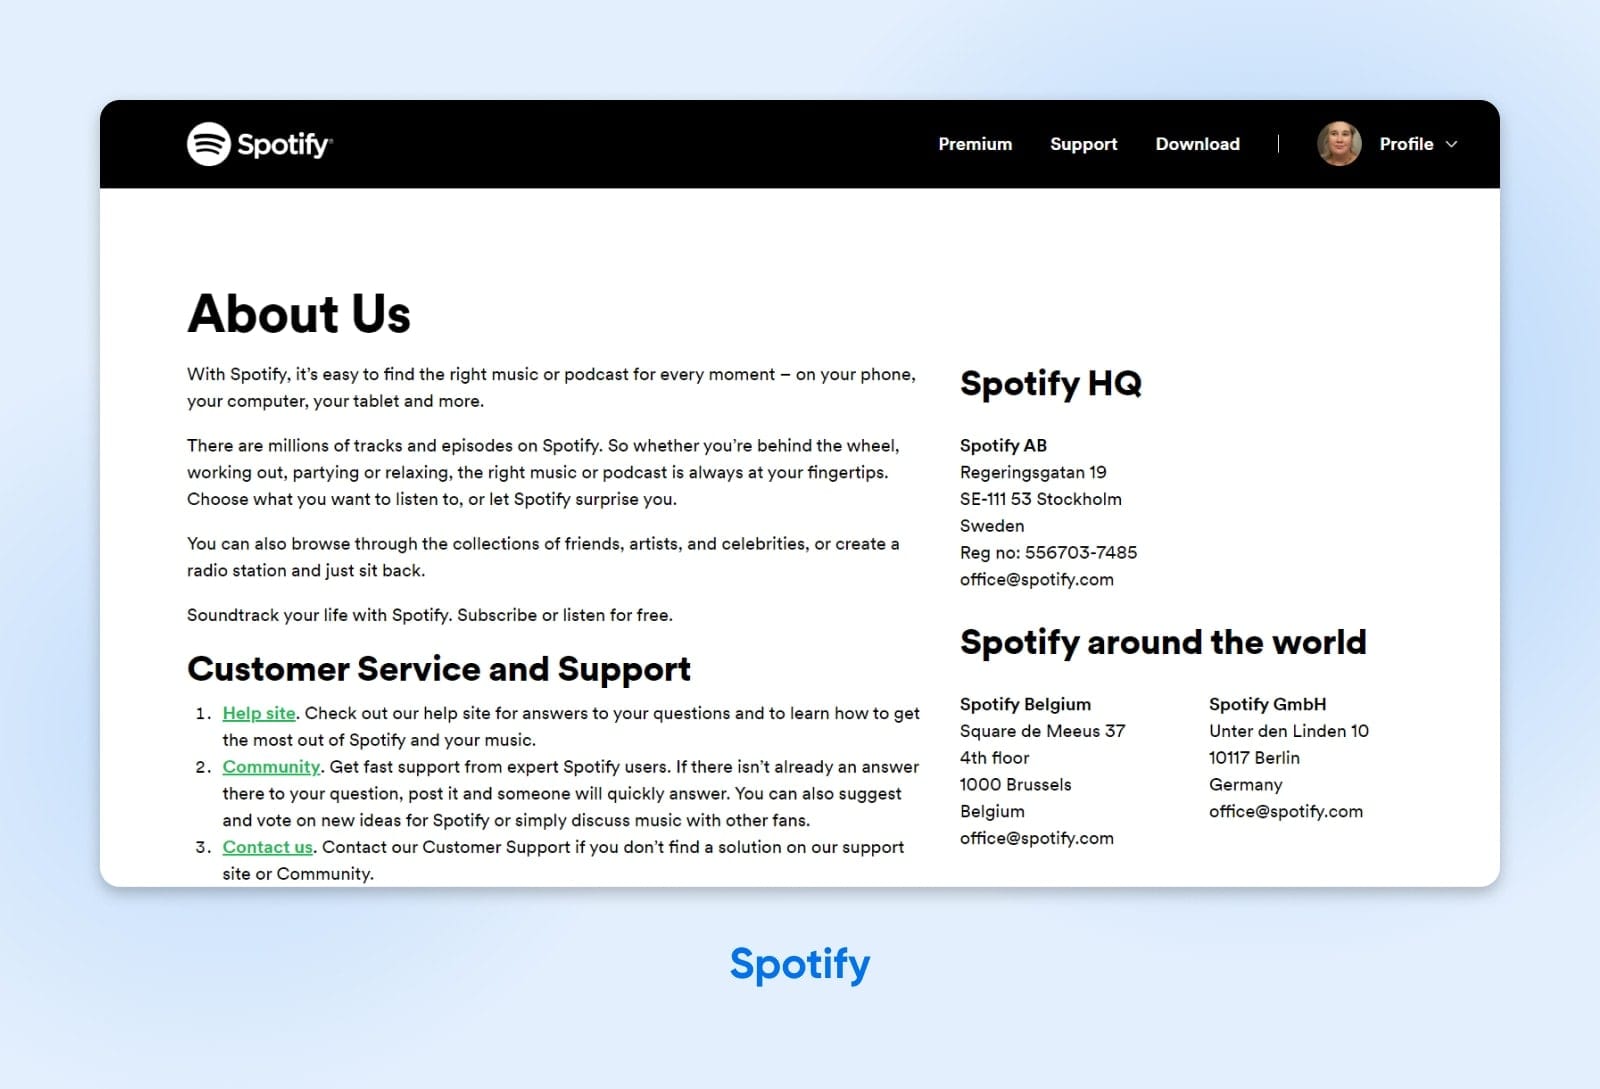 Spotify "About Us" page